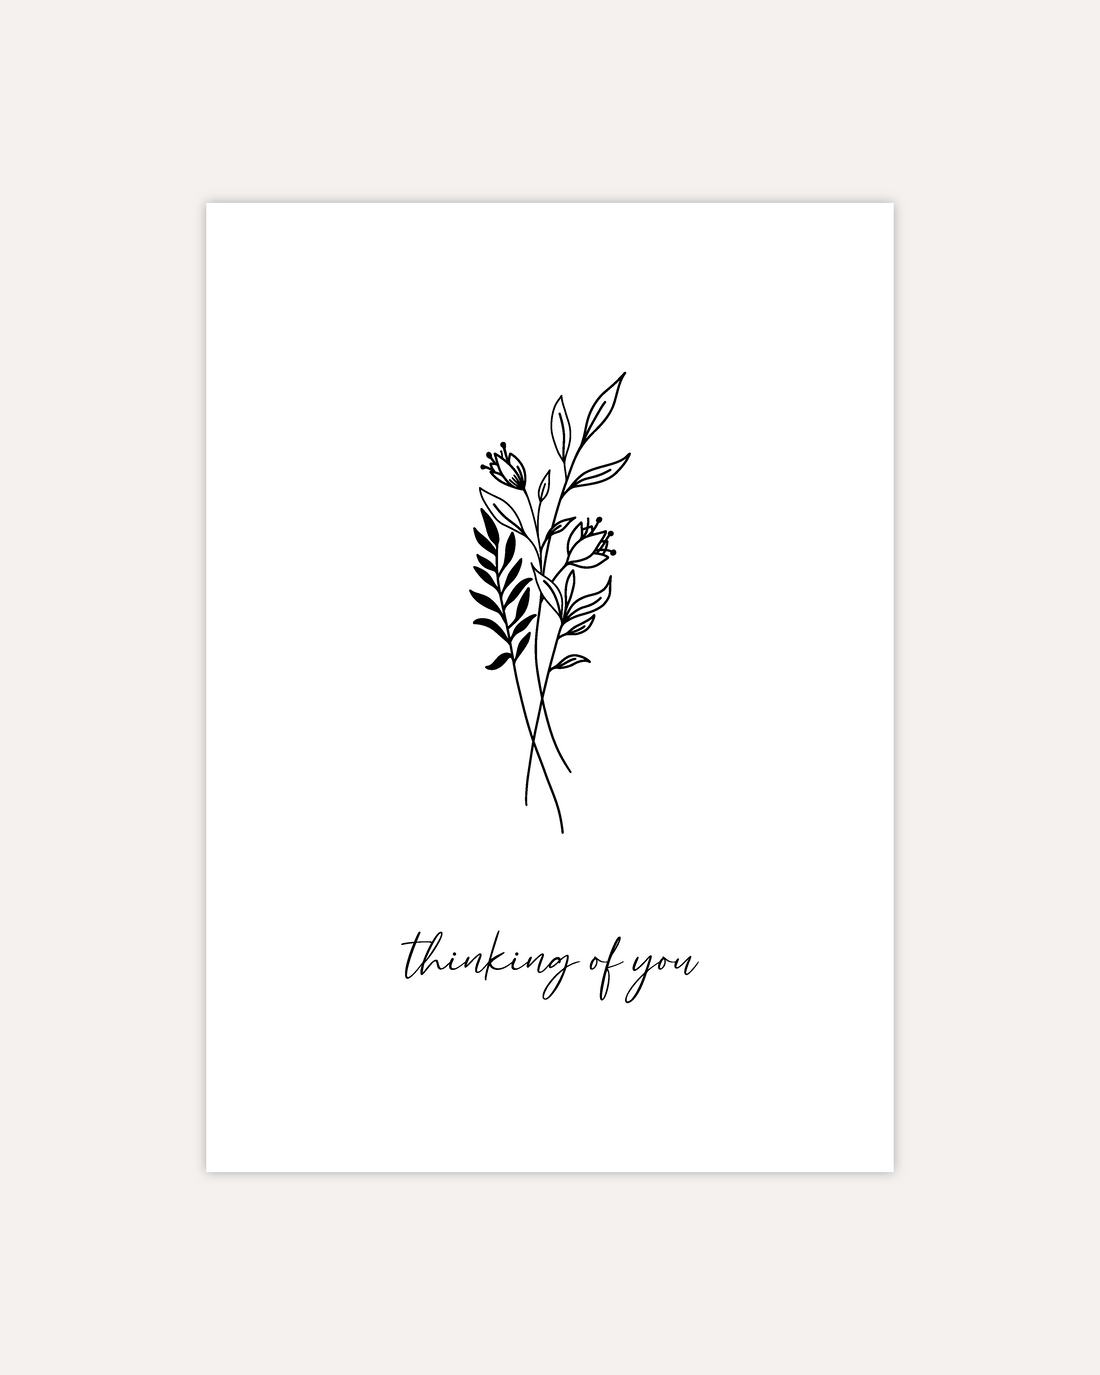 A postcard design showing a line art drawing of some flowers and leaves with a line of cursive writing below, that says &quot;thinking of you&quot;. The design is shown on a beige background.